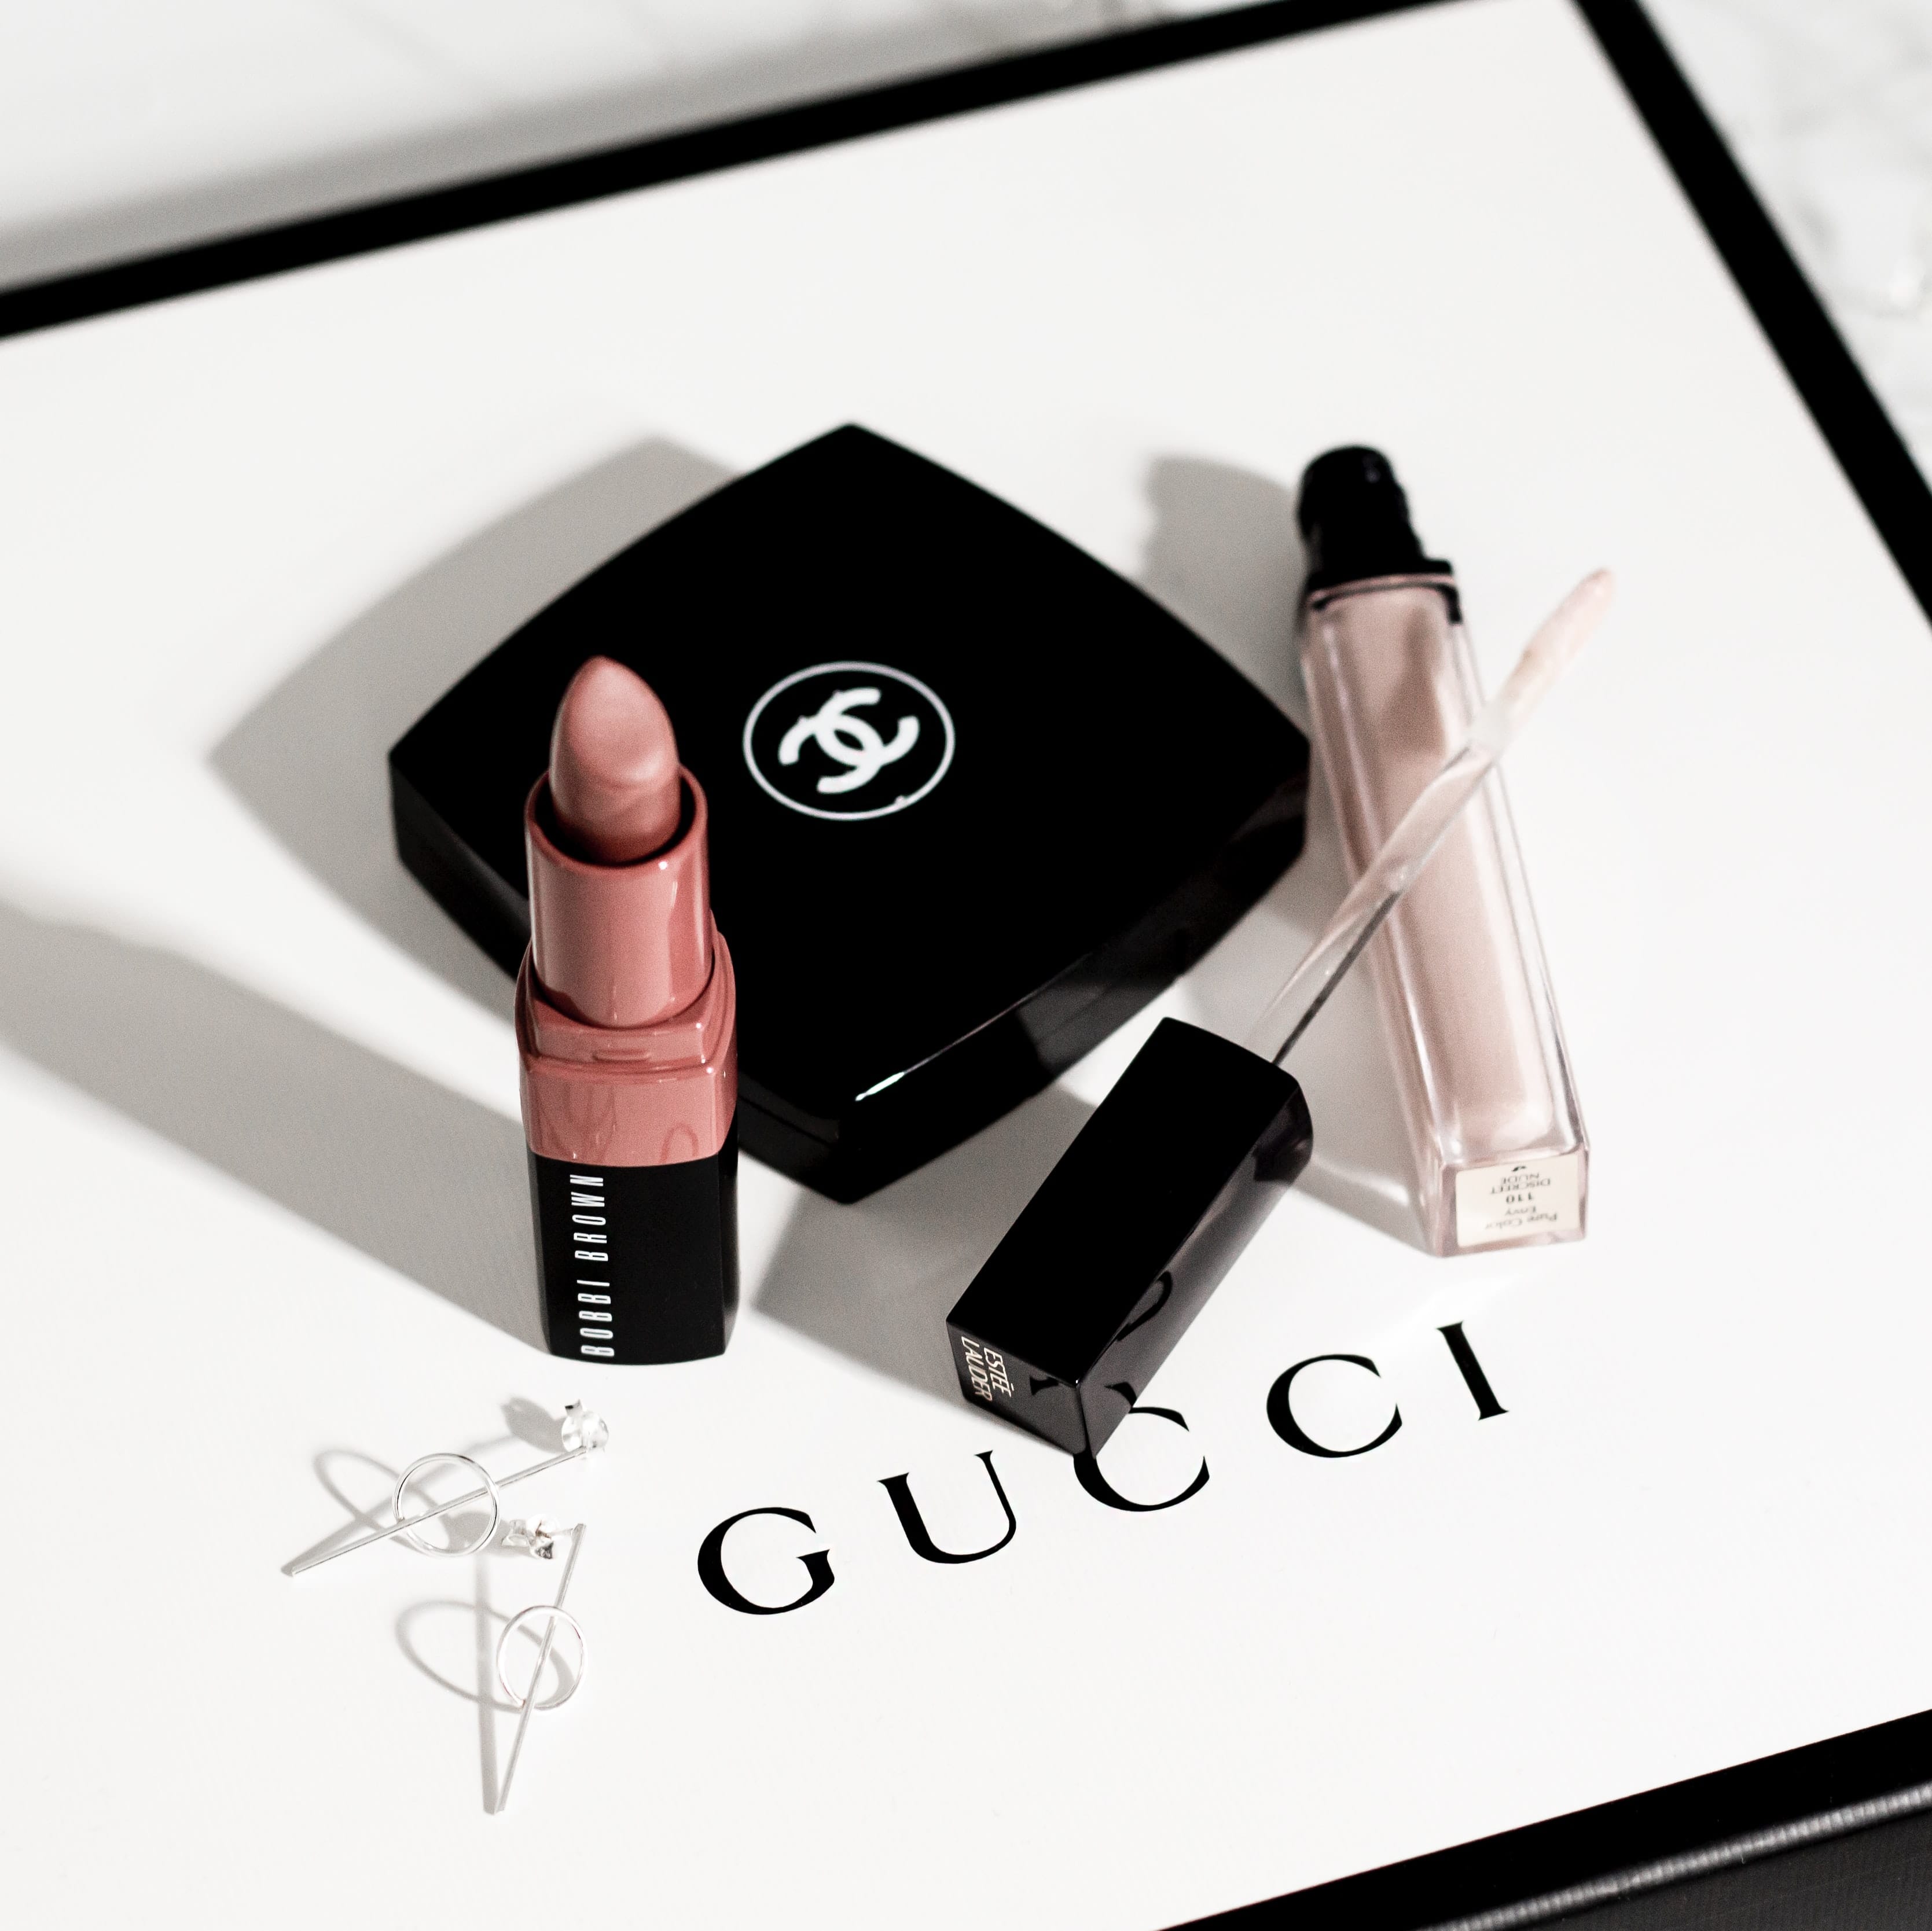 Gucci lipstick and lip gloss on top of packaging